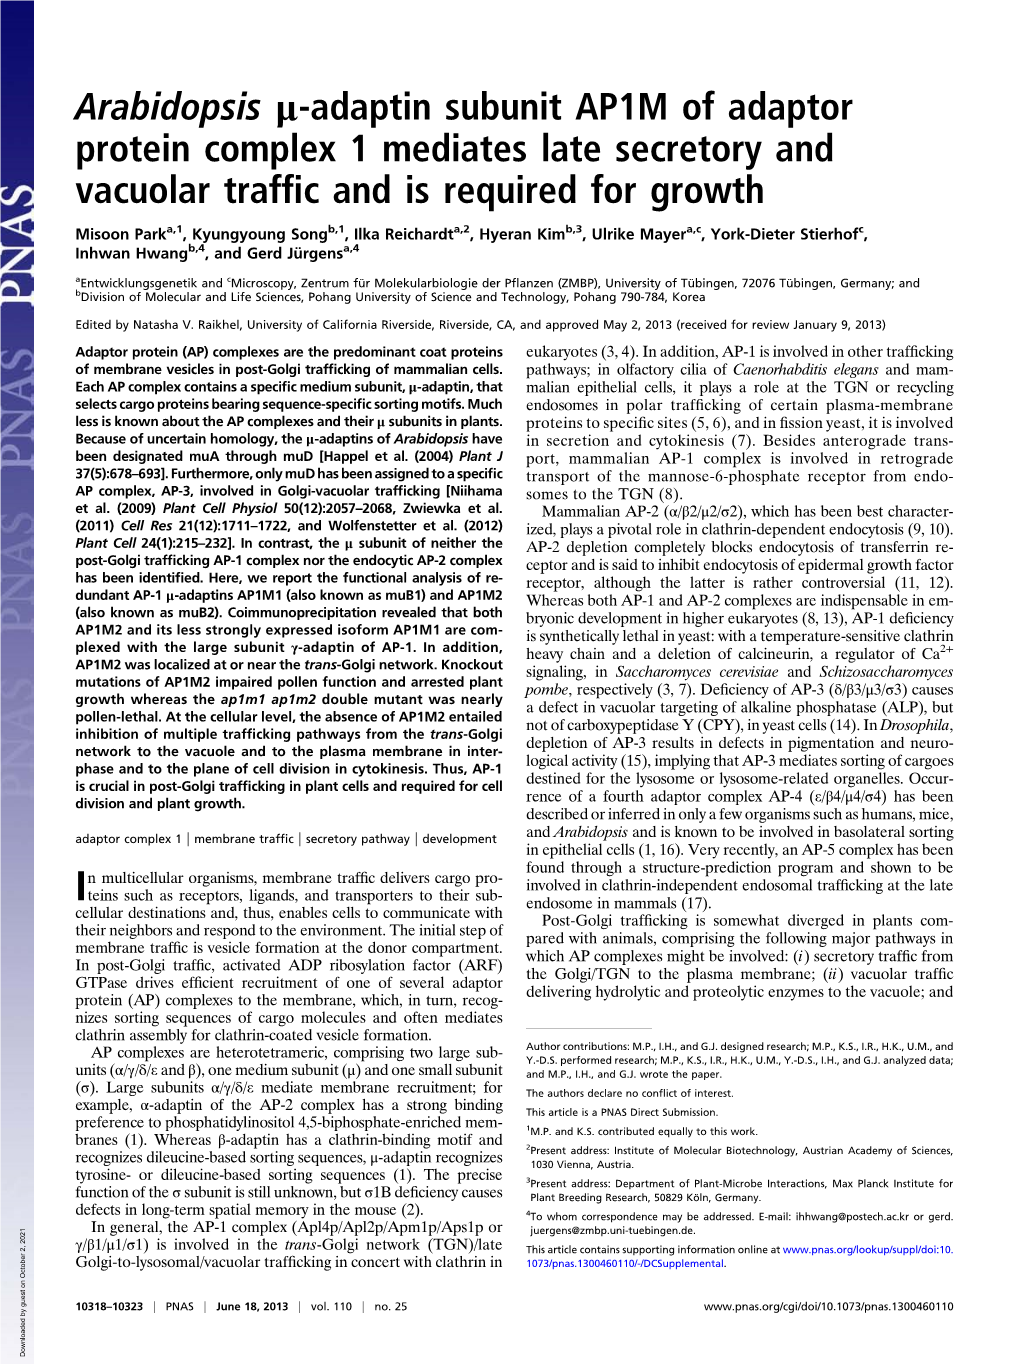 Arabidopsis Μ-Adaptin Subunit AP1M of Adaptor Protein Complex 1 Mediates Late Secretory and Vacuolar Traffic and Is Required Fo